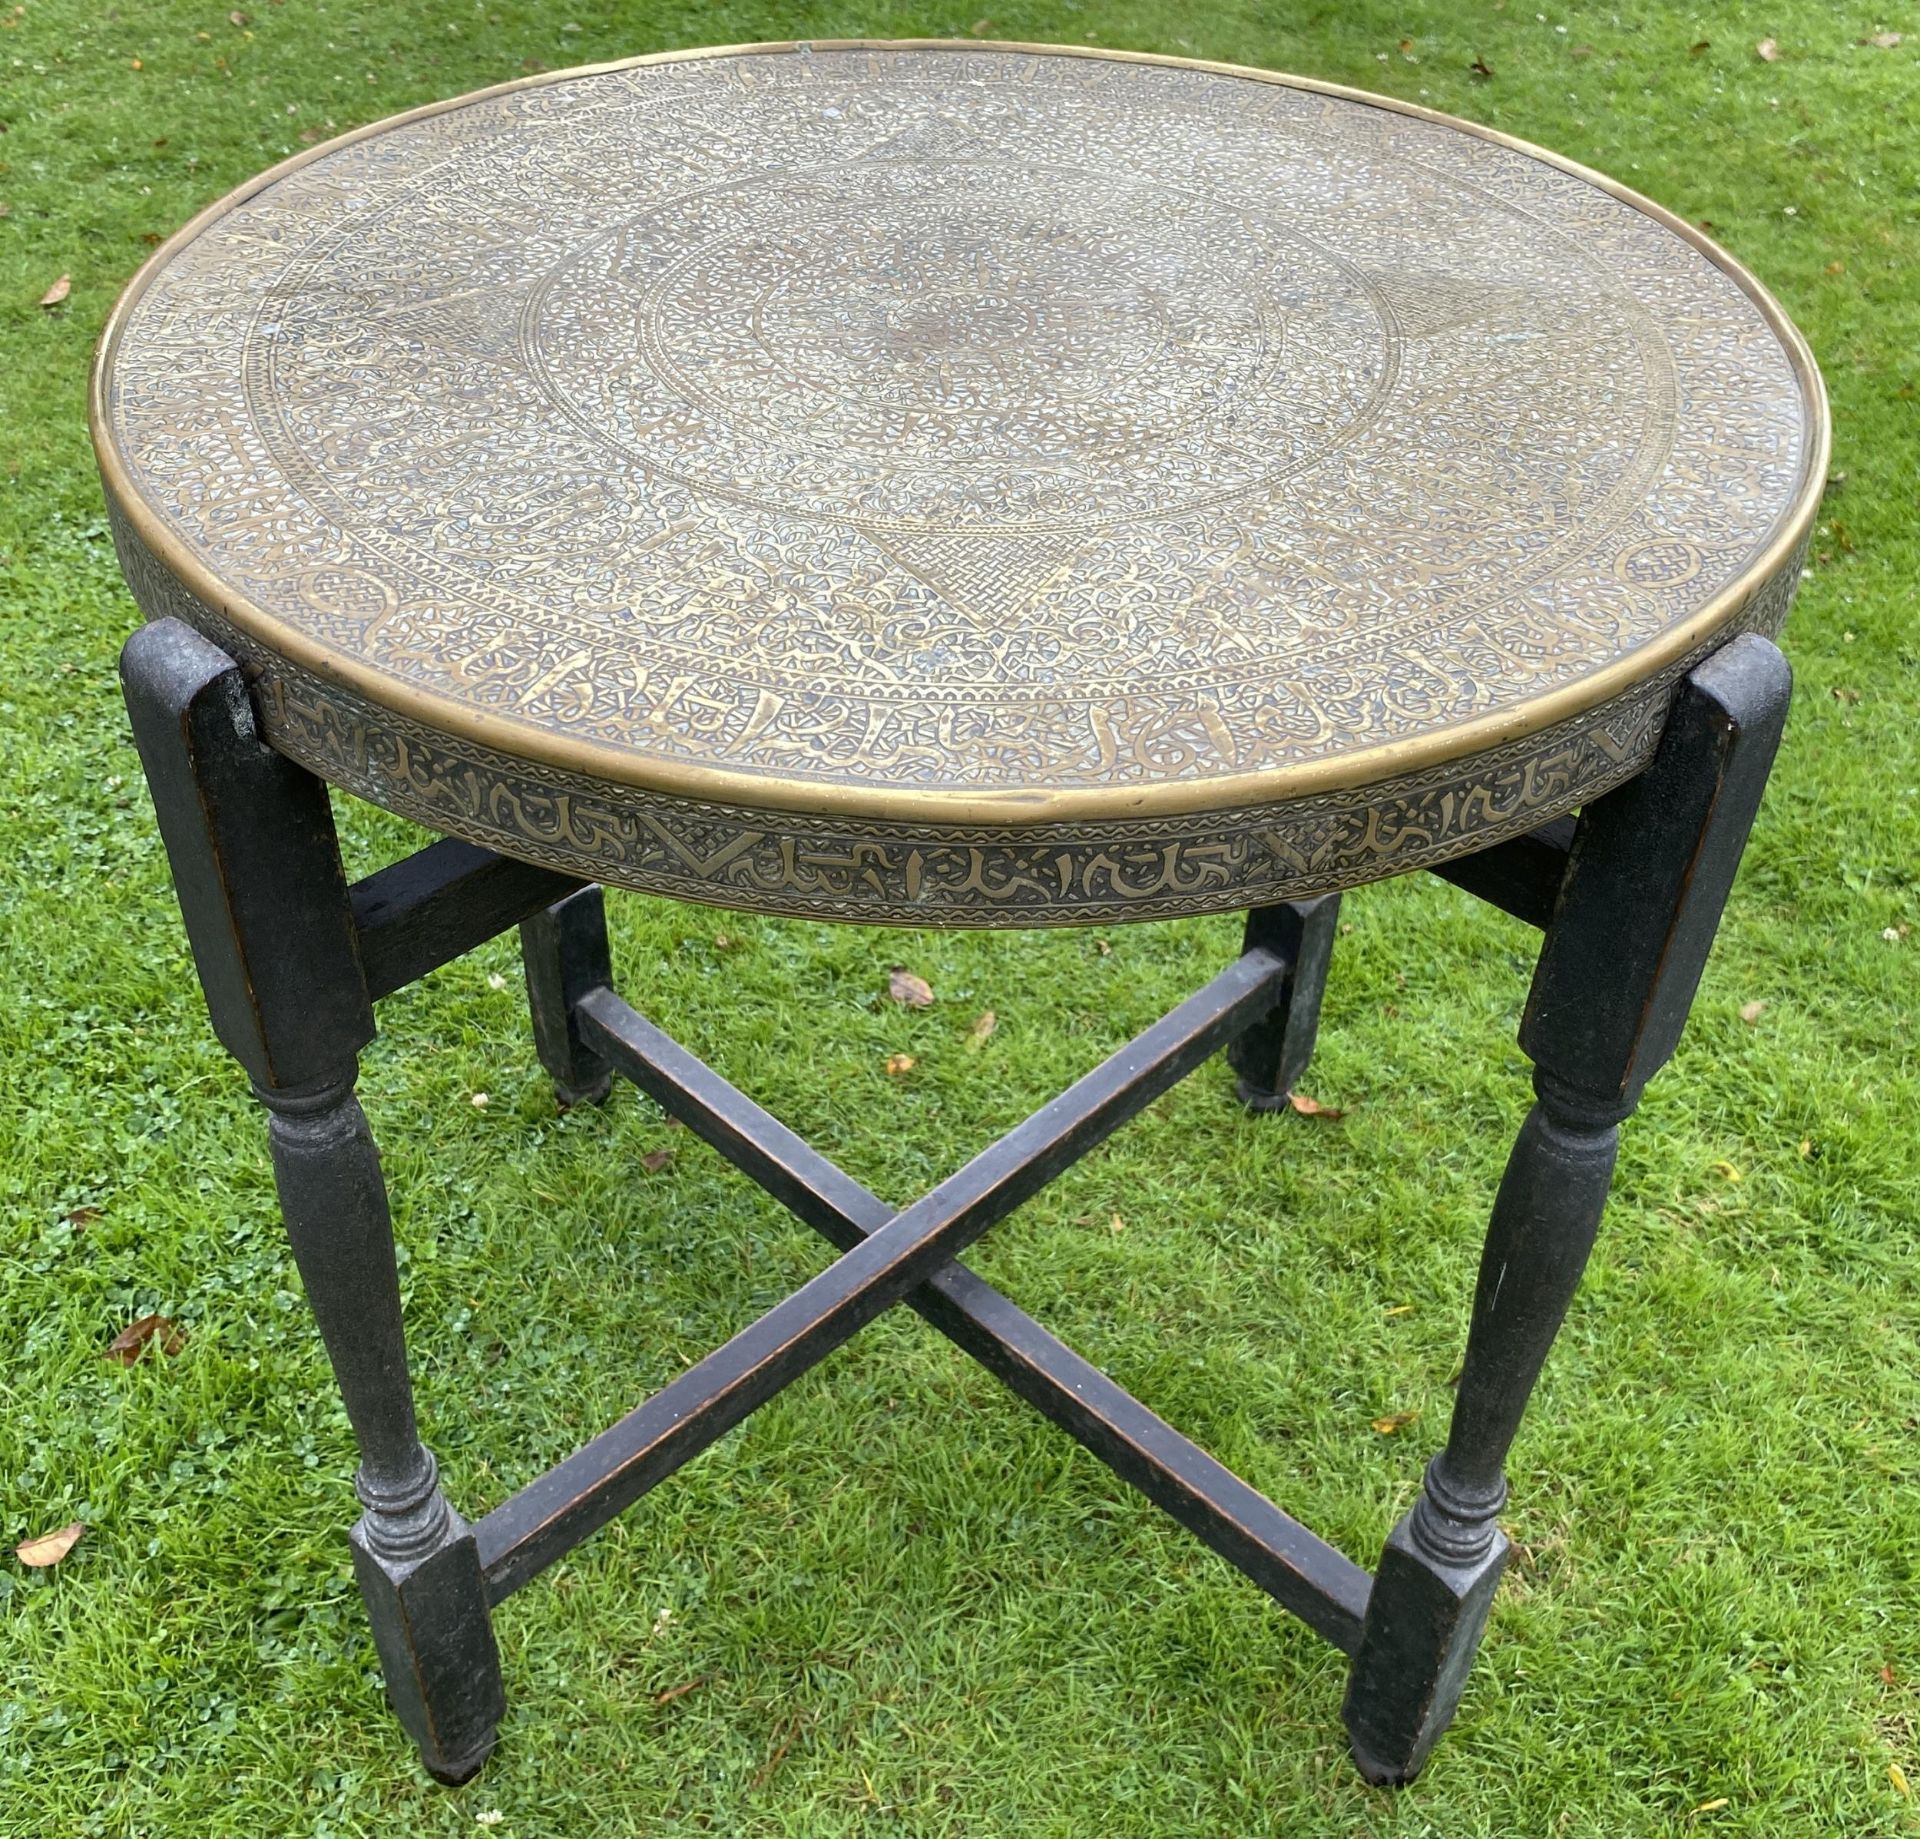 A MIDDLE EASTERN BRASS CIRCULAR TOPPED TABLE ON FOLDING WOODEN BASE, DIAMETER 59CM